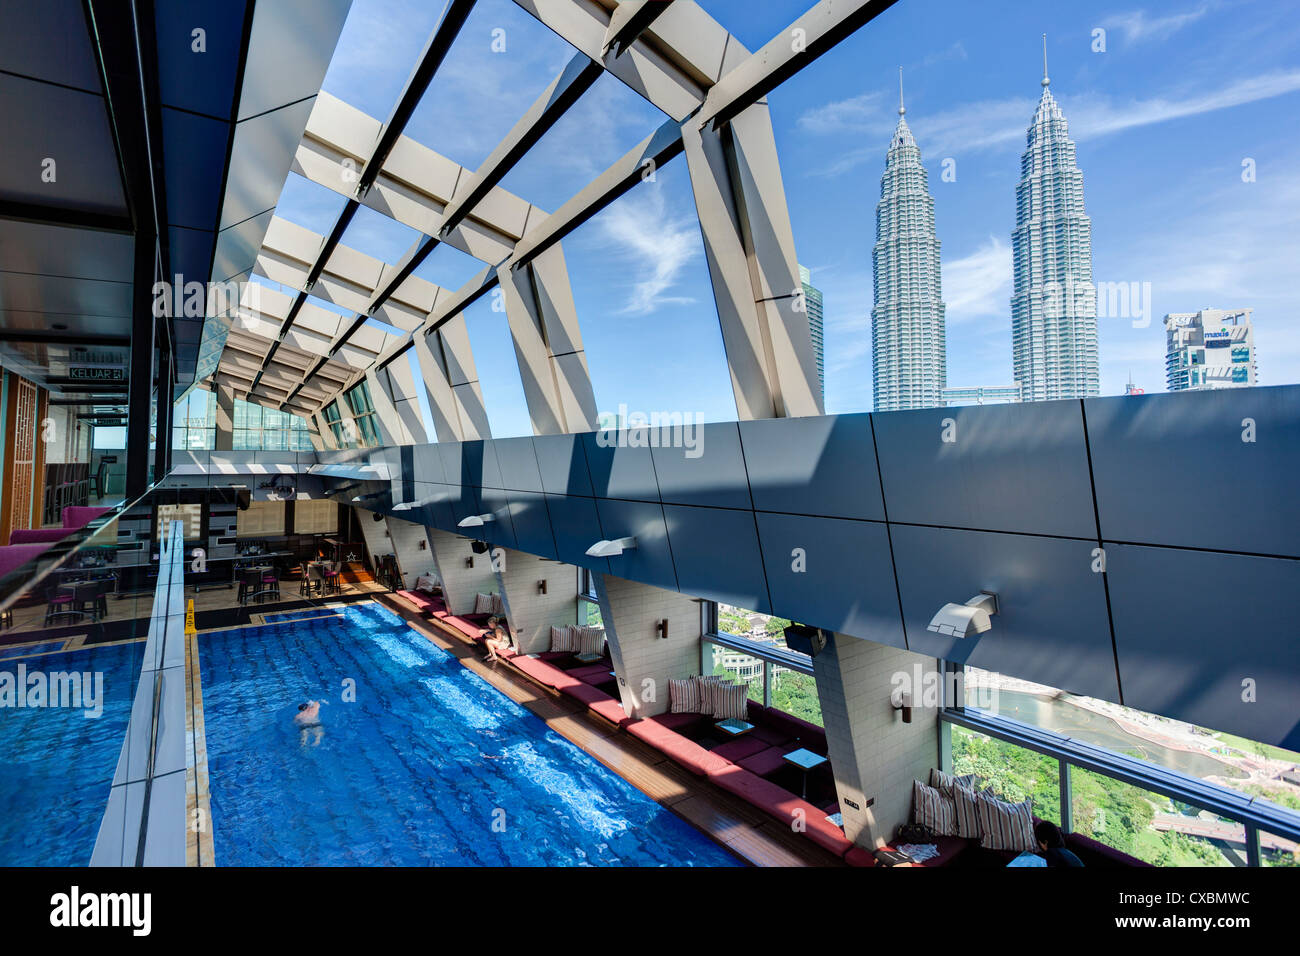 View from a rooftop pool and skybar of the iconic 88 Petronas Towers, Kuala Lumpur, Malaysia, Southeast Asia, Asia Stock Photo